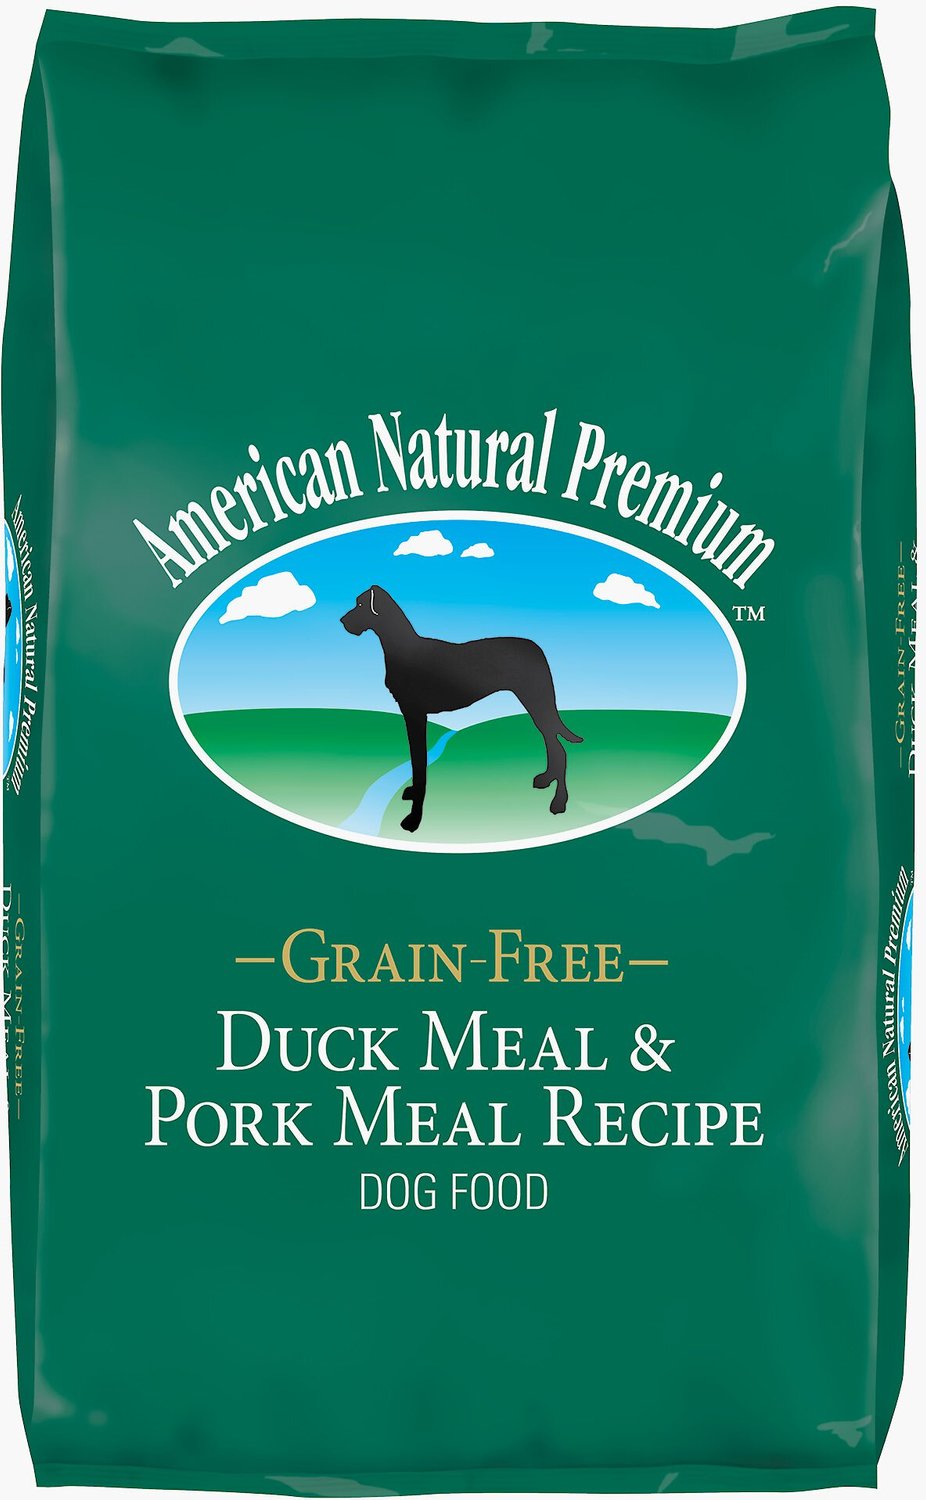 What is Duck Meal in Dog Food?